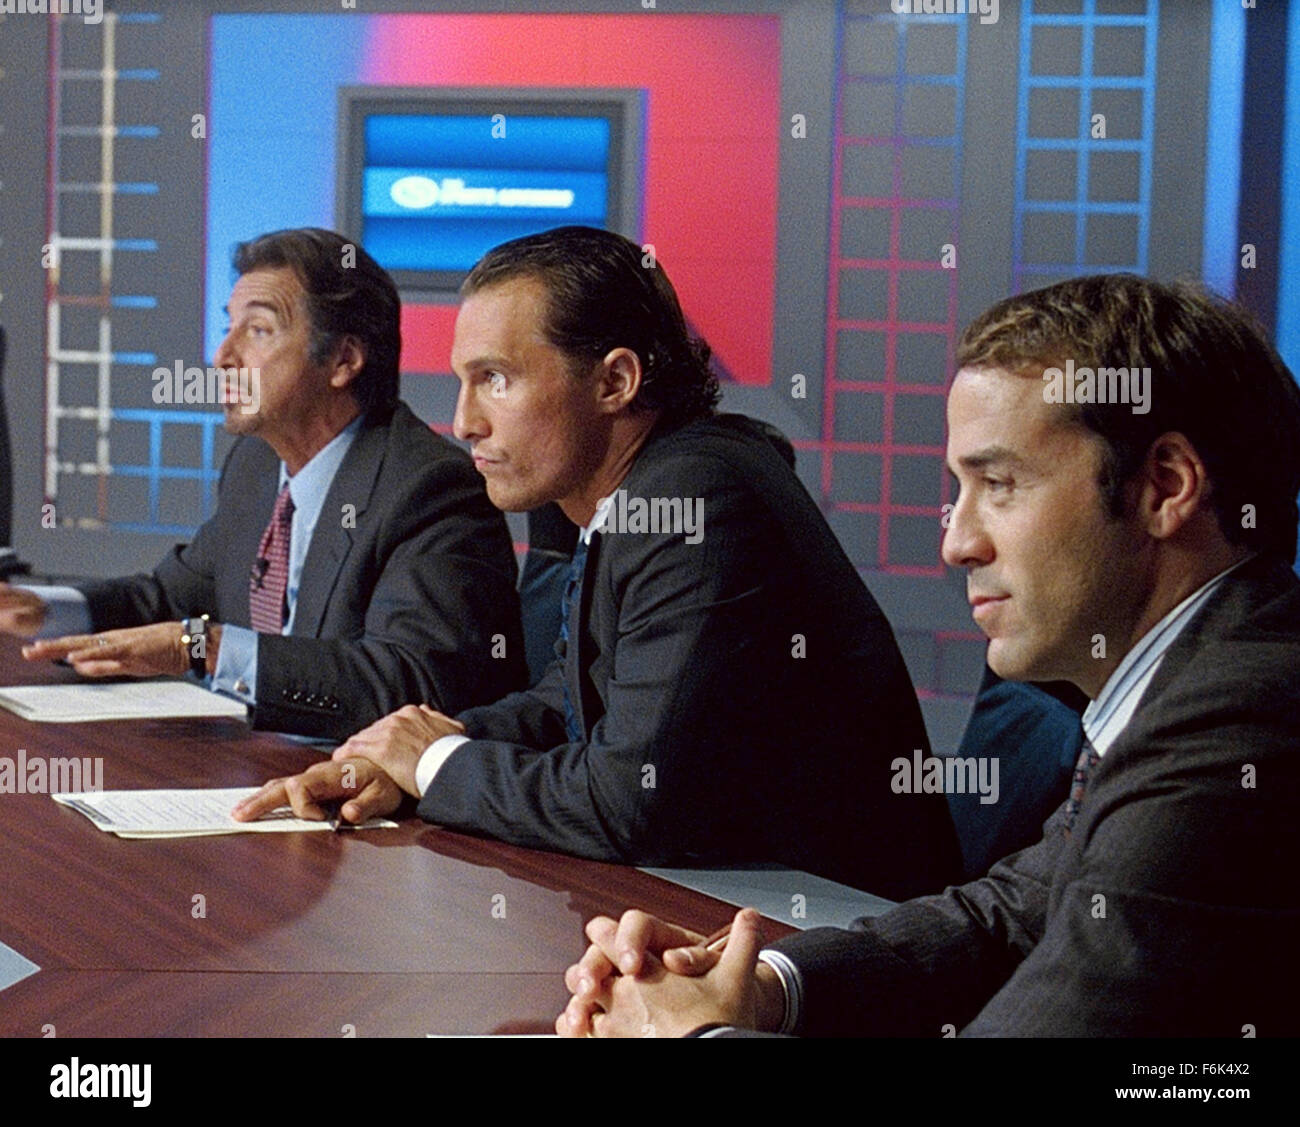 RELEASE DATE: October 7, 2005. MOVIE TITLE: Two for the Money. STUDIO: Universal Pictures. PLOT: After suffering a career-ending injury, a former college football star aligns himself with one of the most renowned touts in the sports-gambling business. PICTURED: AL PACINO as Sports gambling impresario Walter Abraham, MATTHEW MCCONAUGHEY as Brandon Lang and JEREMY PIVEN as Jerry. Stock Photo